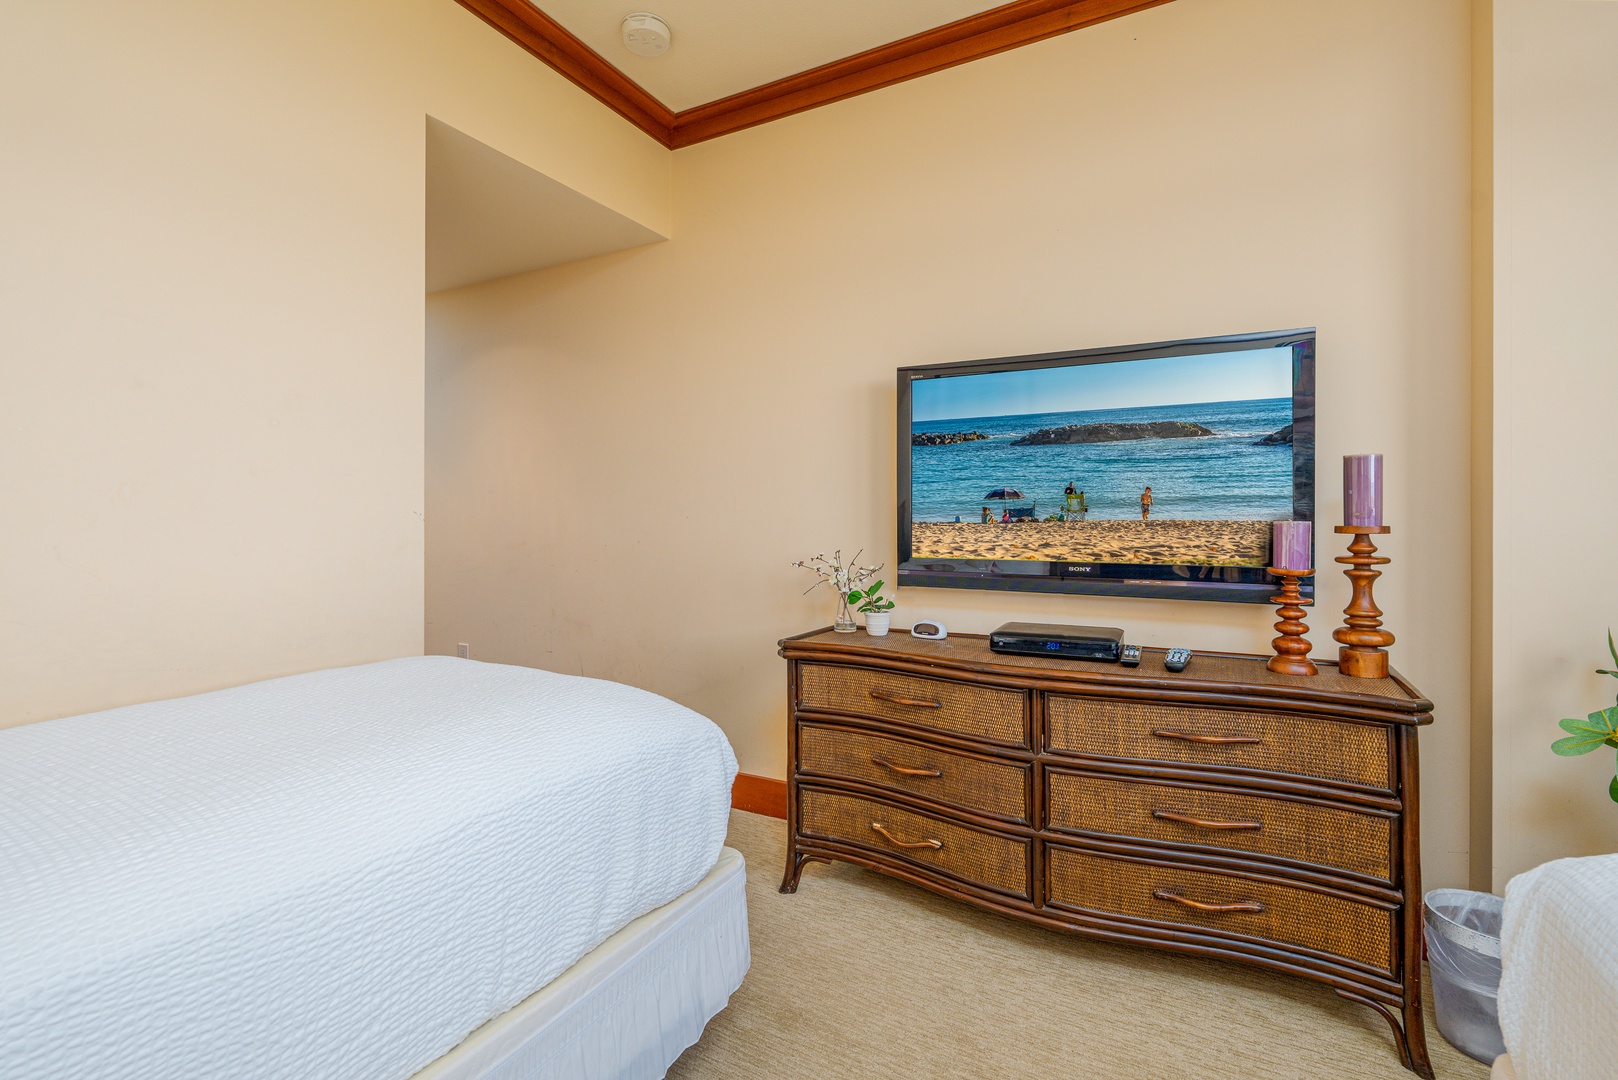 Kapolei Vacation Rentals, Ko Olina Beach Villas O904 - The second guest bedroom with a TV and dresser.